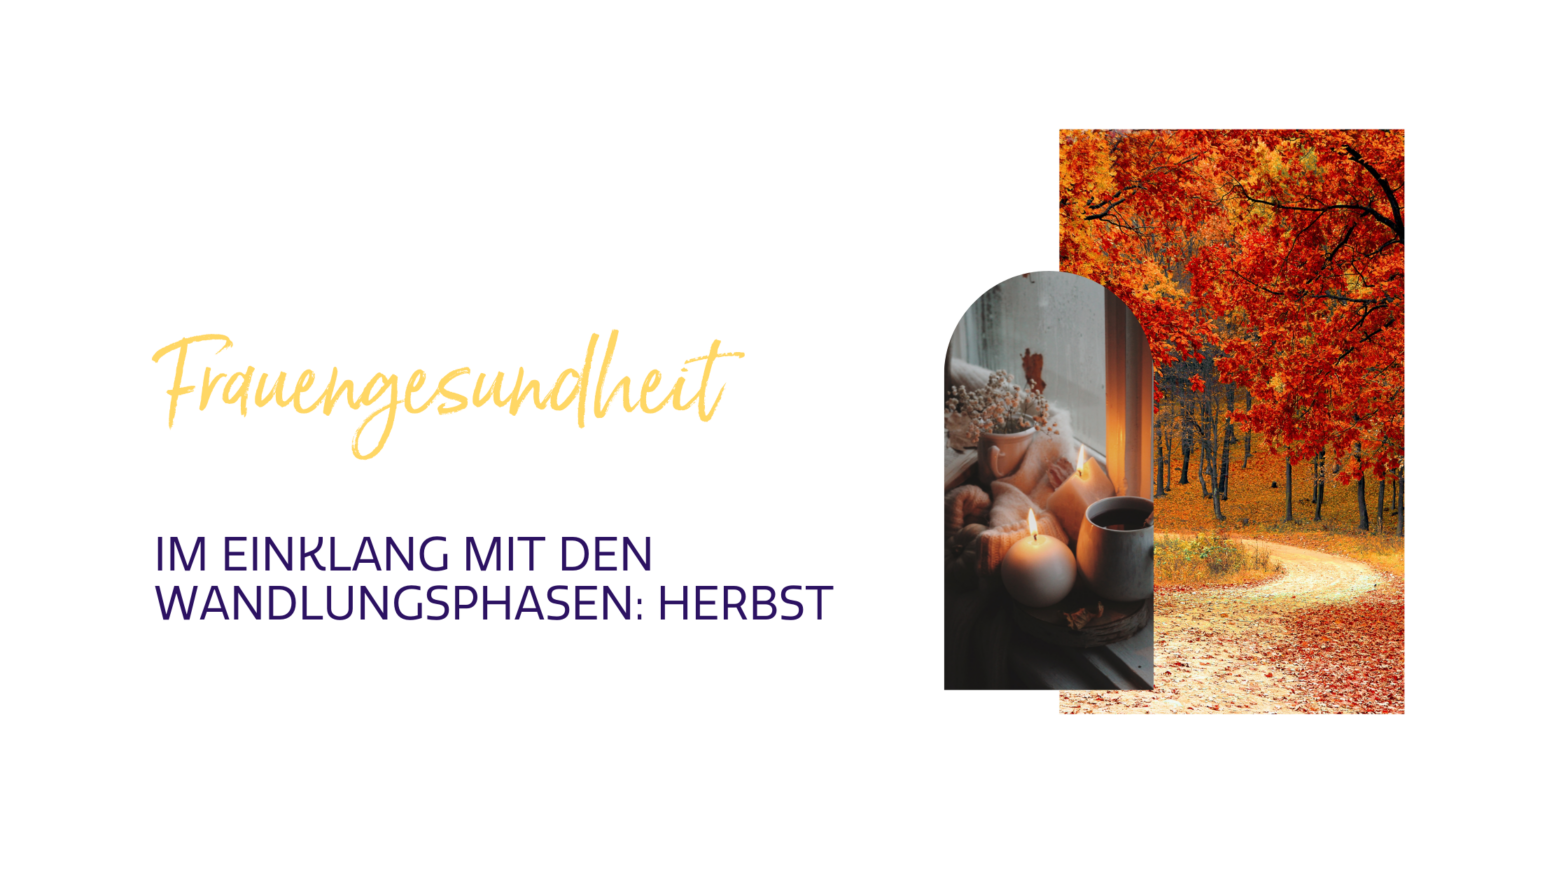 Wandlungsphase Metall: Herbst